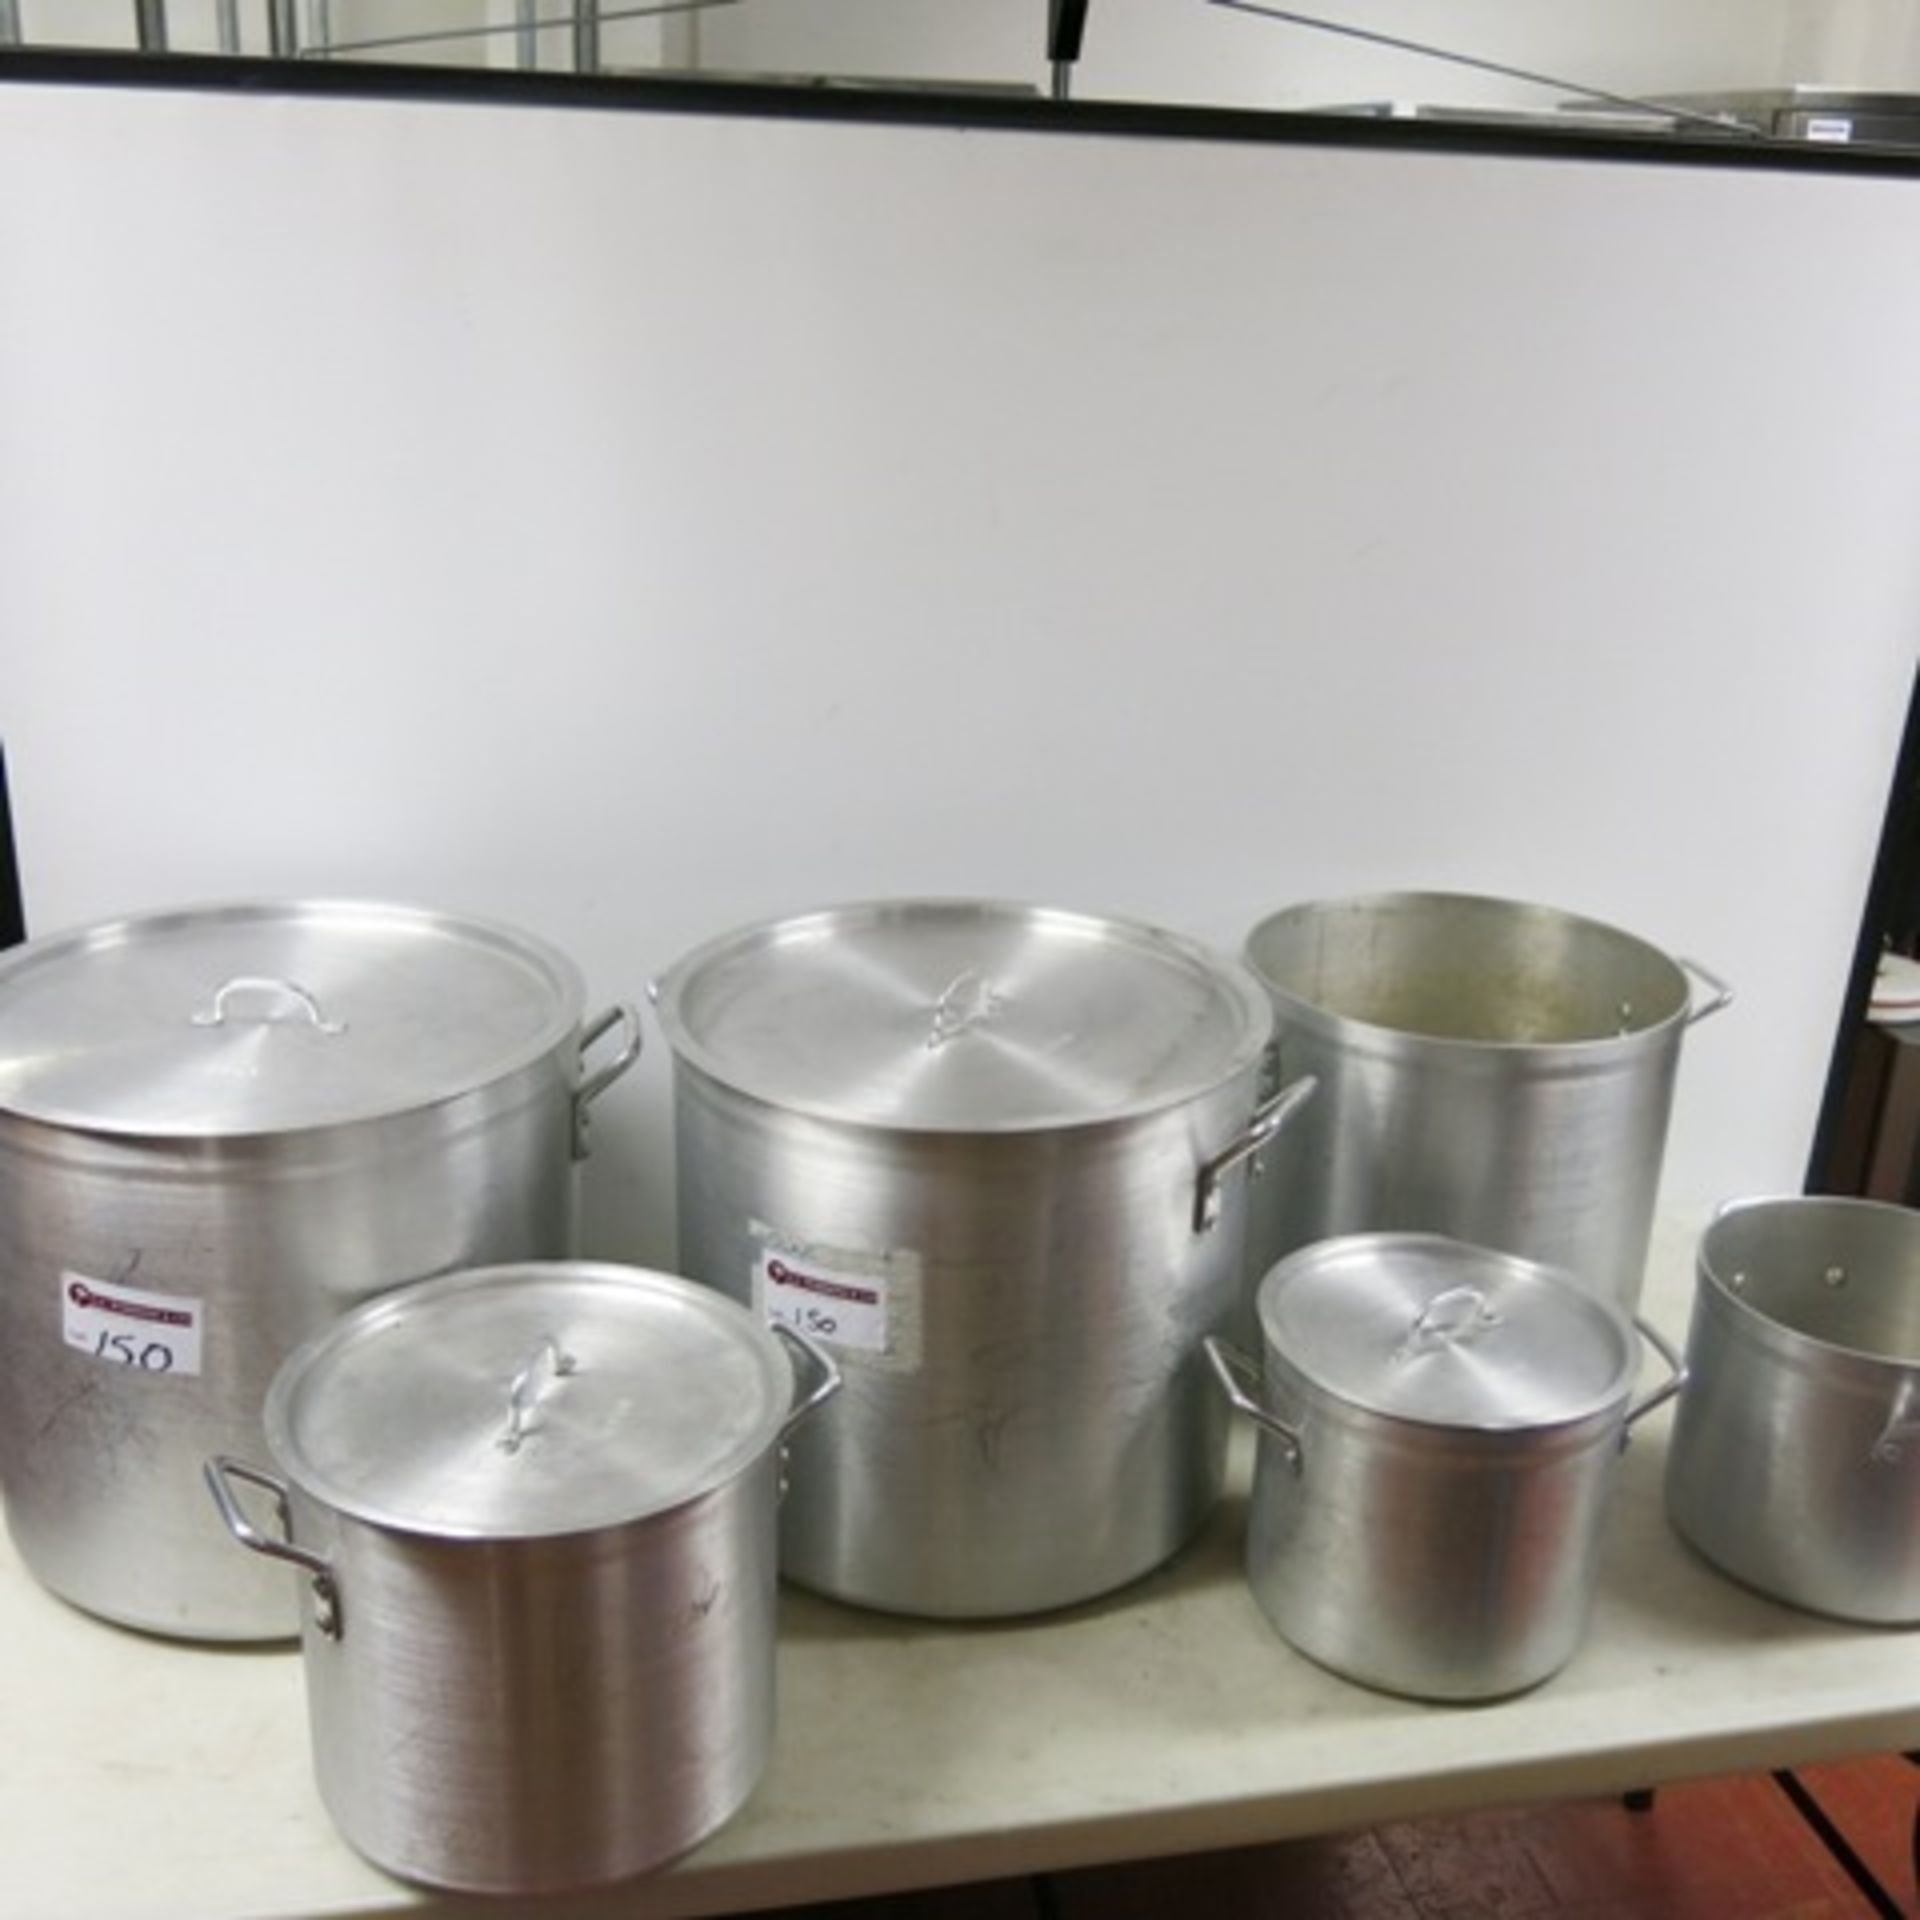 6 x Vogue Assorted Sized Aluminium Stock Pots with 4 Lids - Image 6 of 6